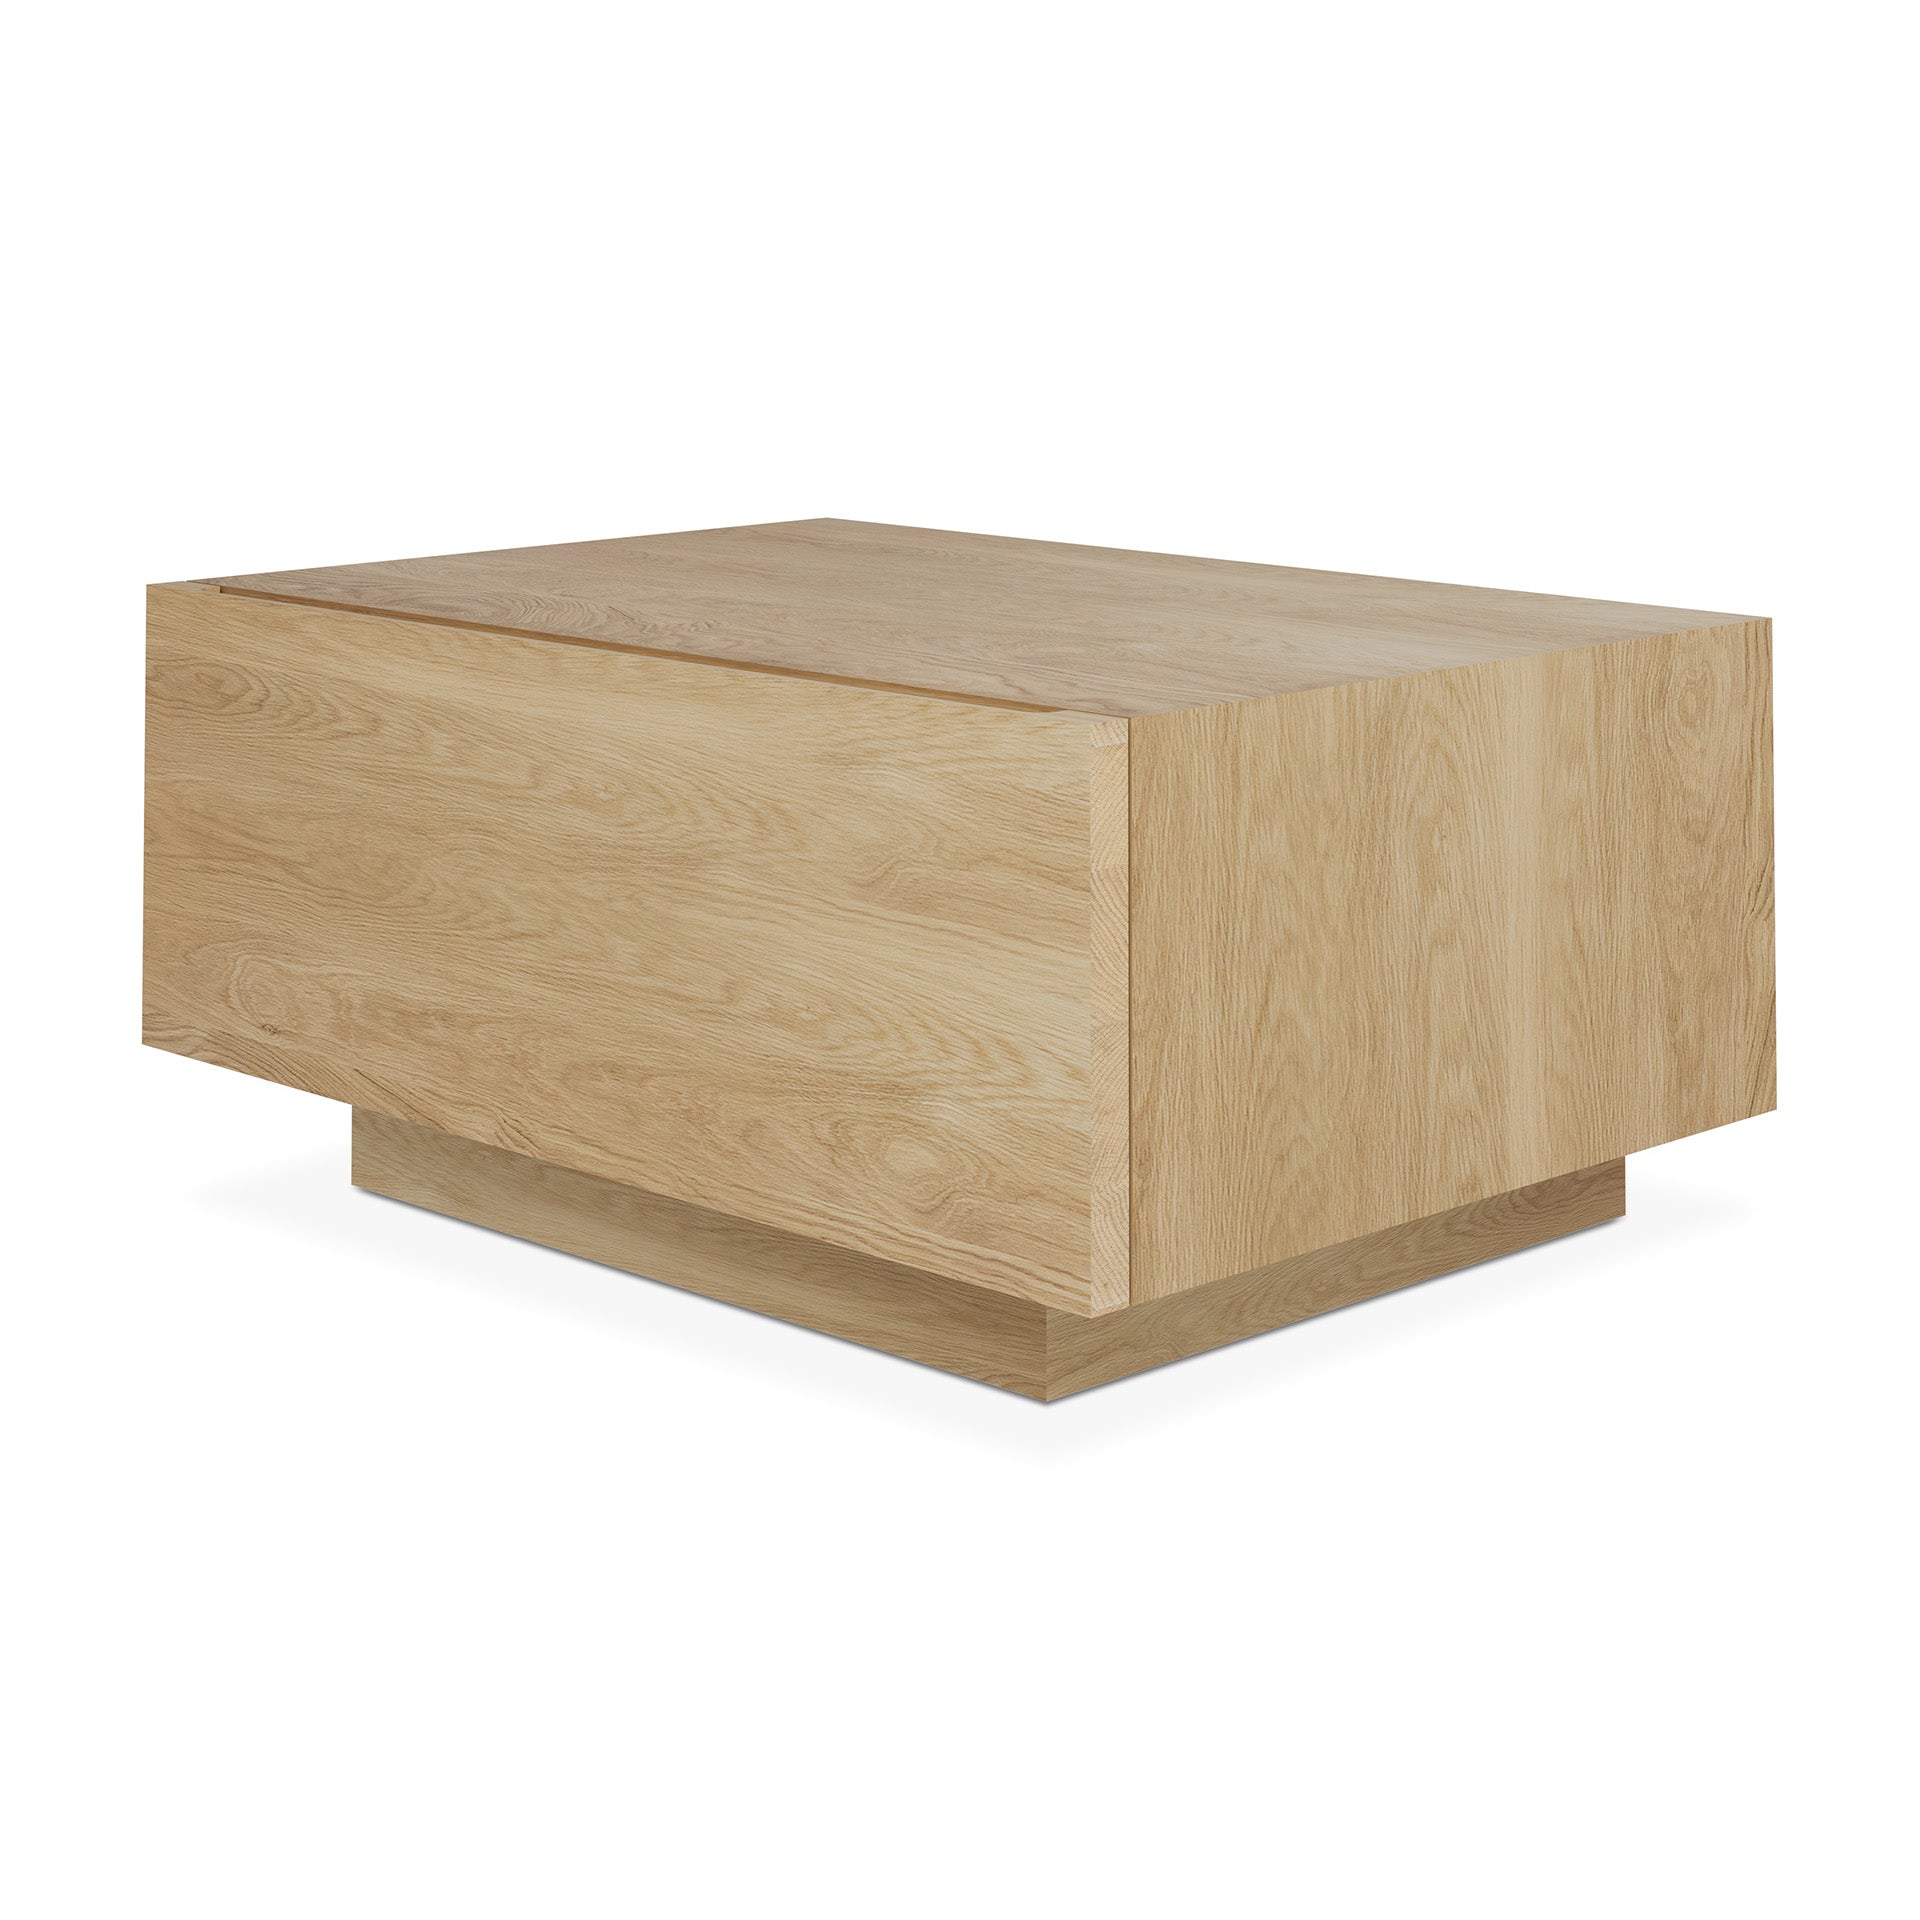 Ethnicraft Oak Madra Bedside Table is available from Make Your House A Home, Bendigo, Victoria, Australia